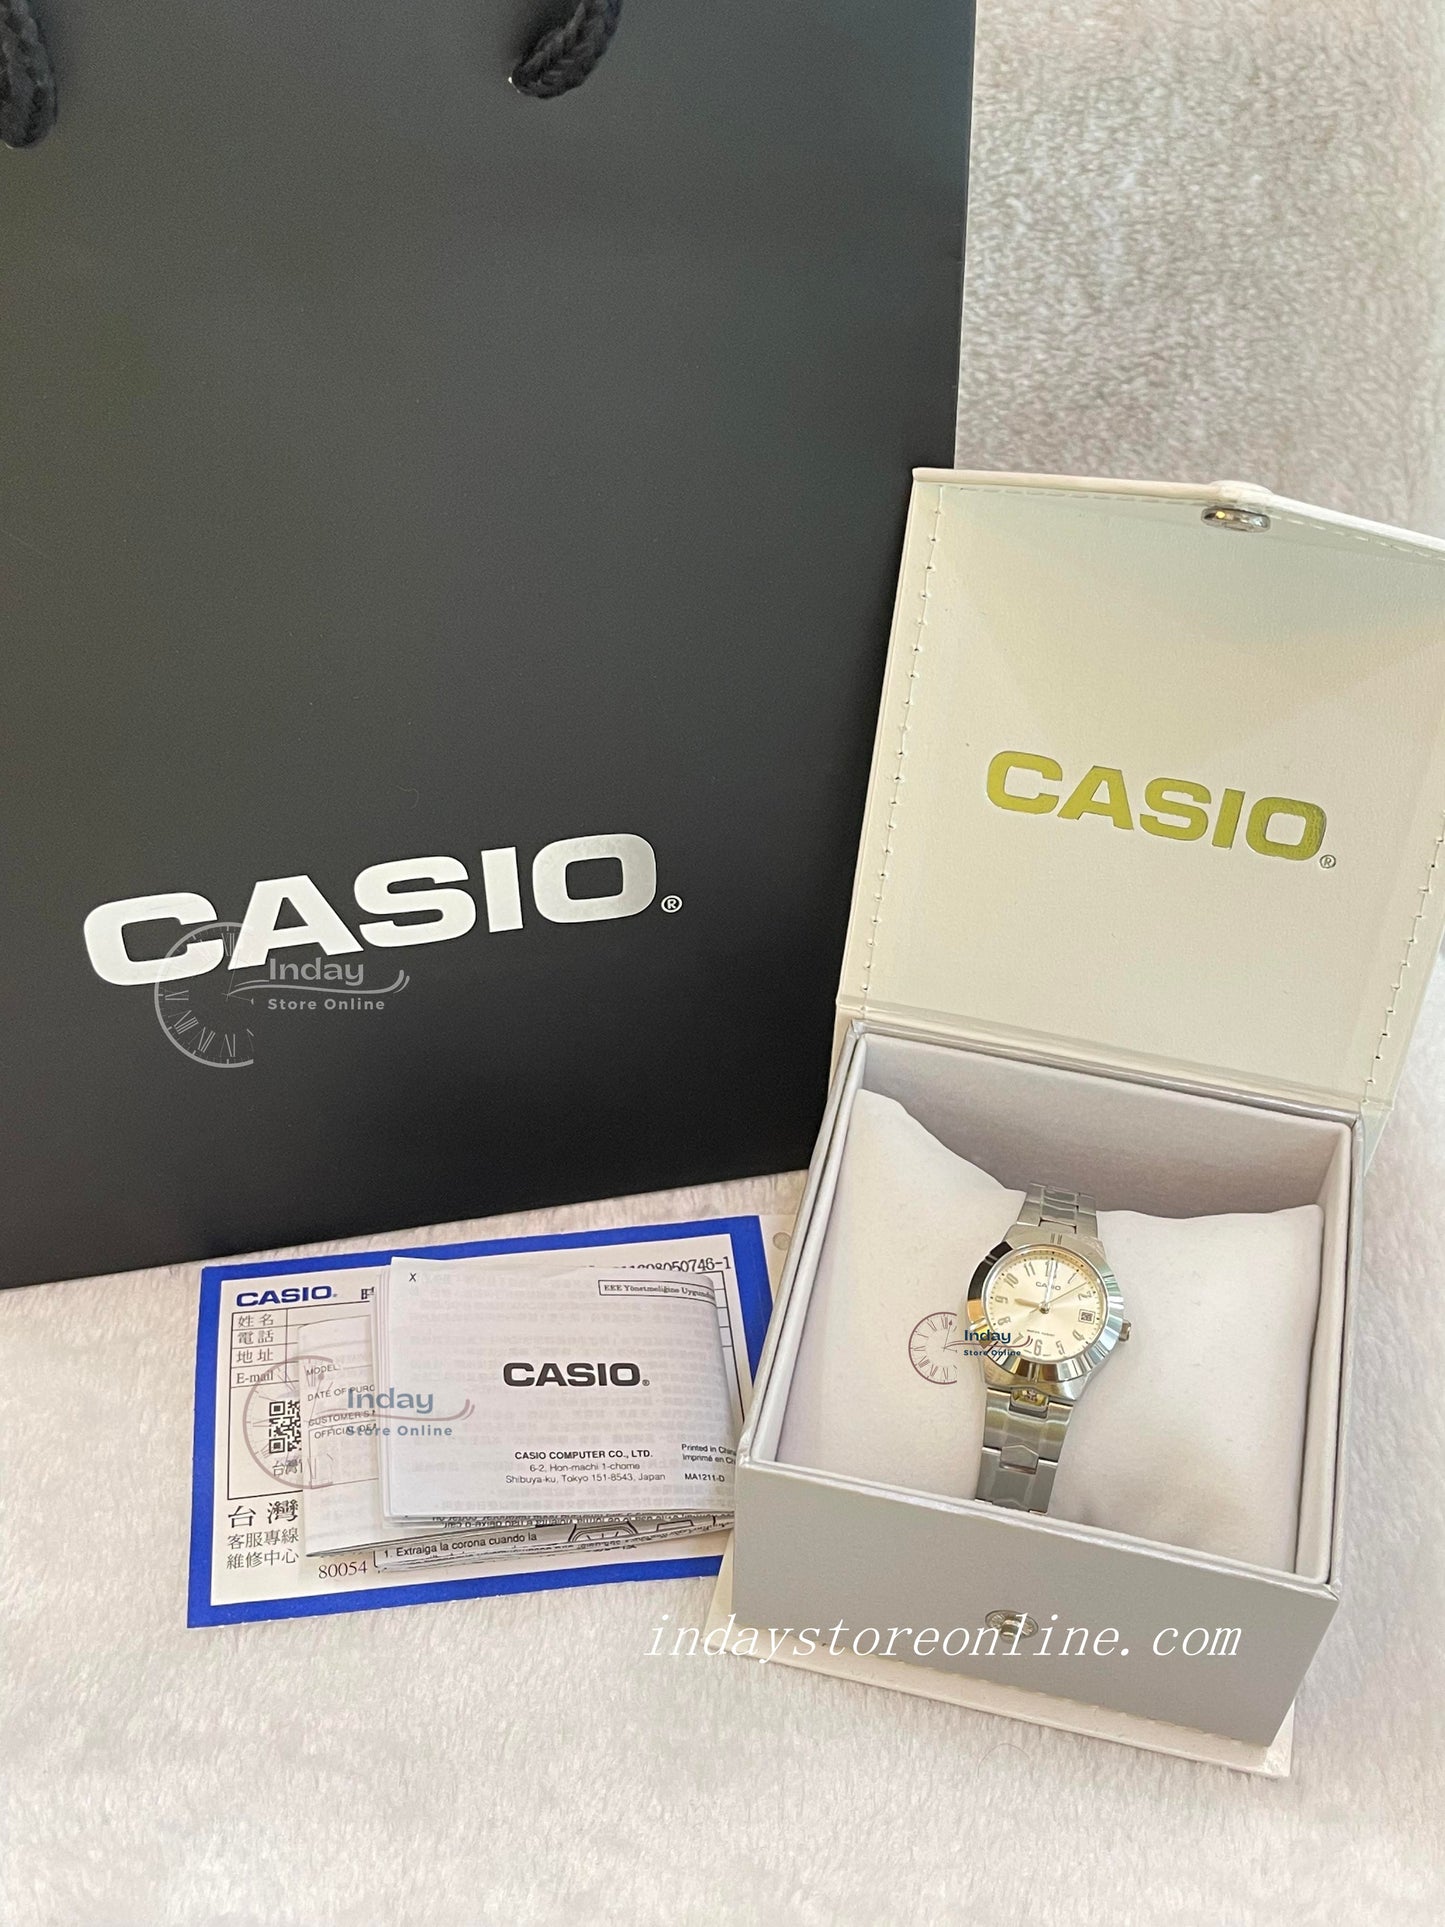 Casio Fashion Women's Watch LTP-1241D-7A2 Silver Stainless Steel Band Mineral Glass